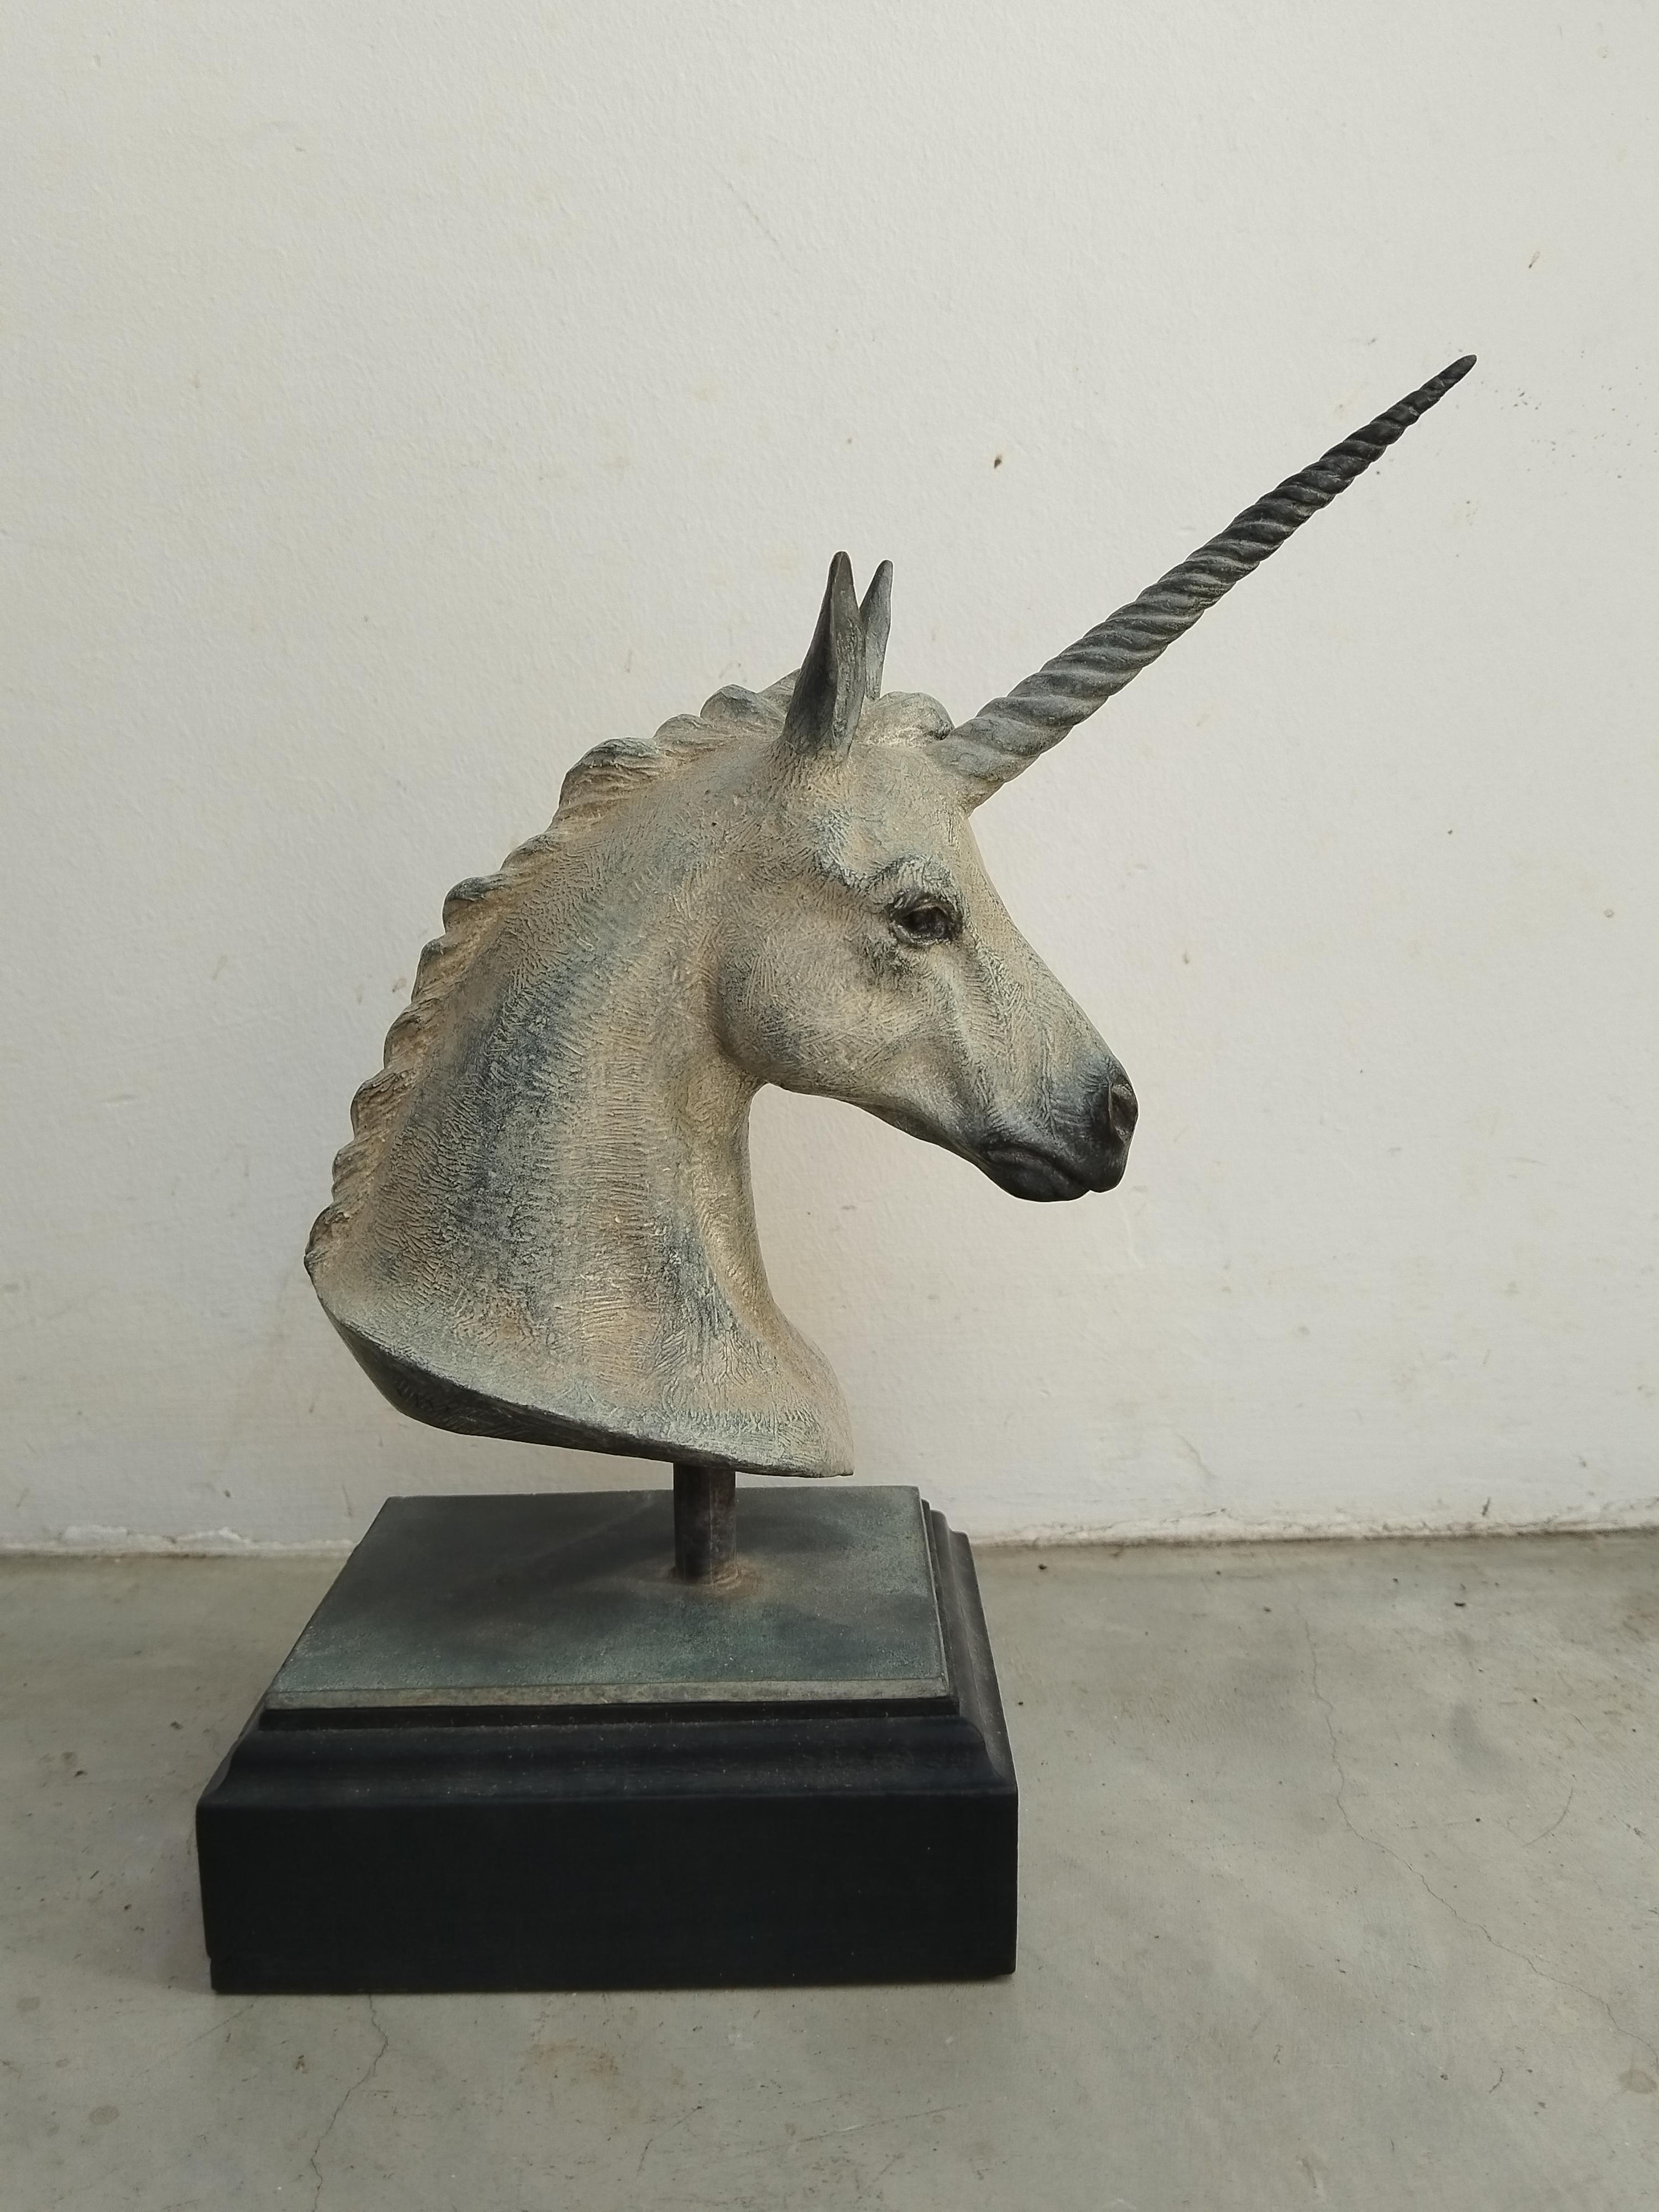 A small, detailed, limited edition bronze sculpture of a unicorn bust a wooden base. Edition 1/12.
